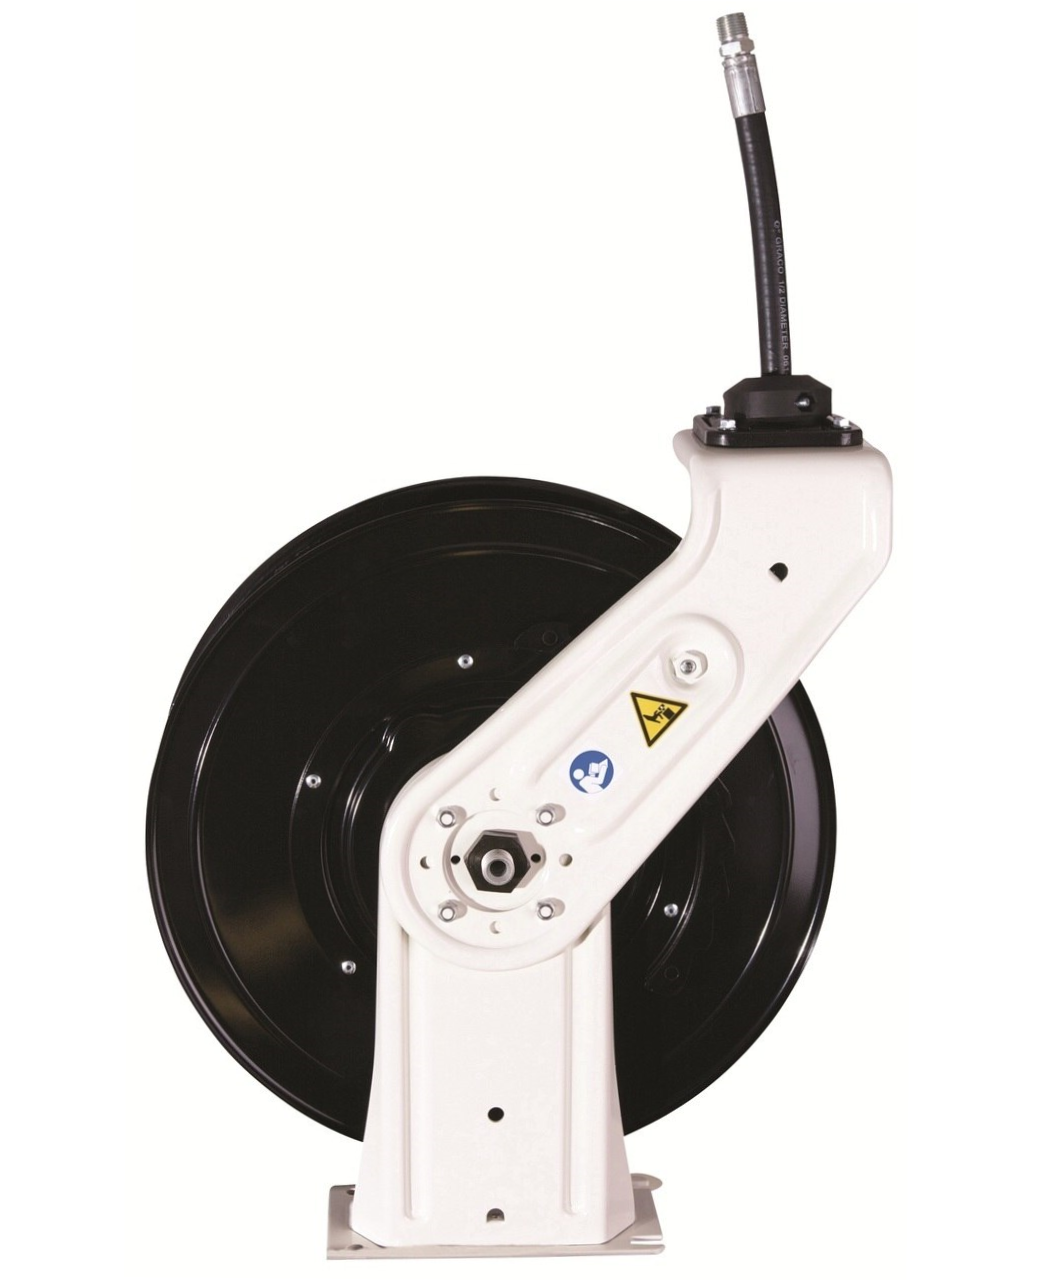 Graco SD20 Series Hose Reel w/ 1/2 in. X 50 ft. Hose - Air/Water - White (Overhead Mount)